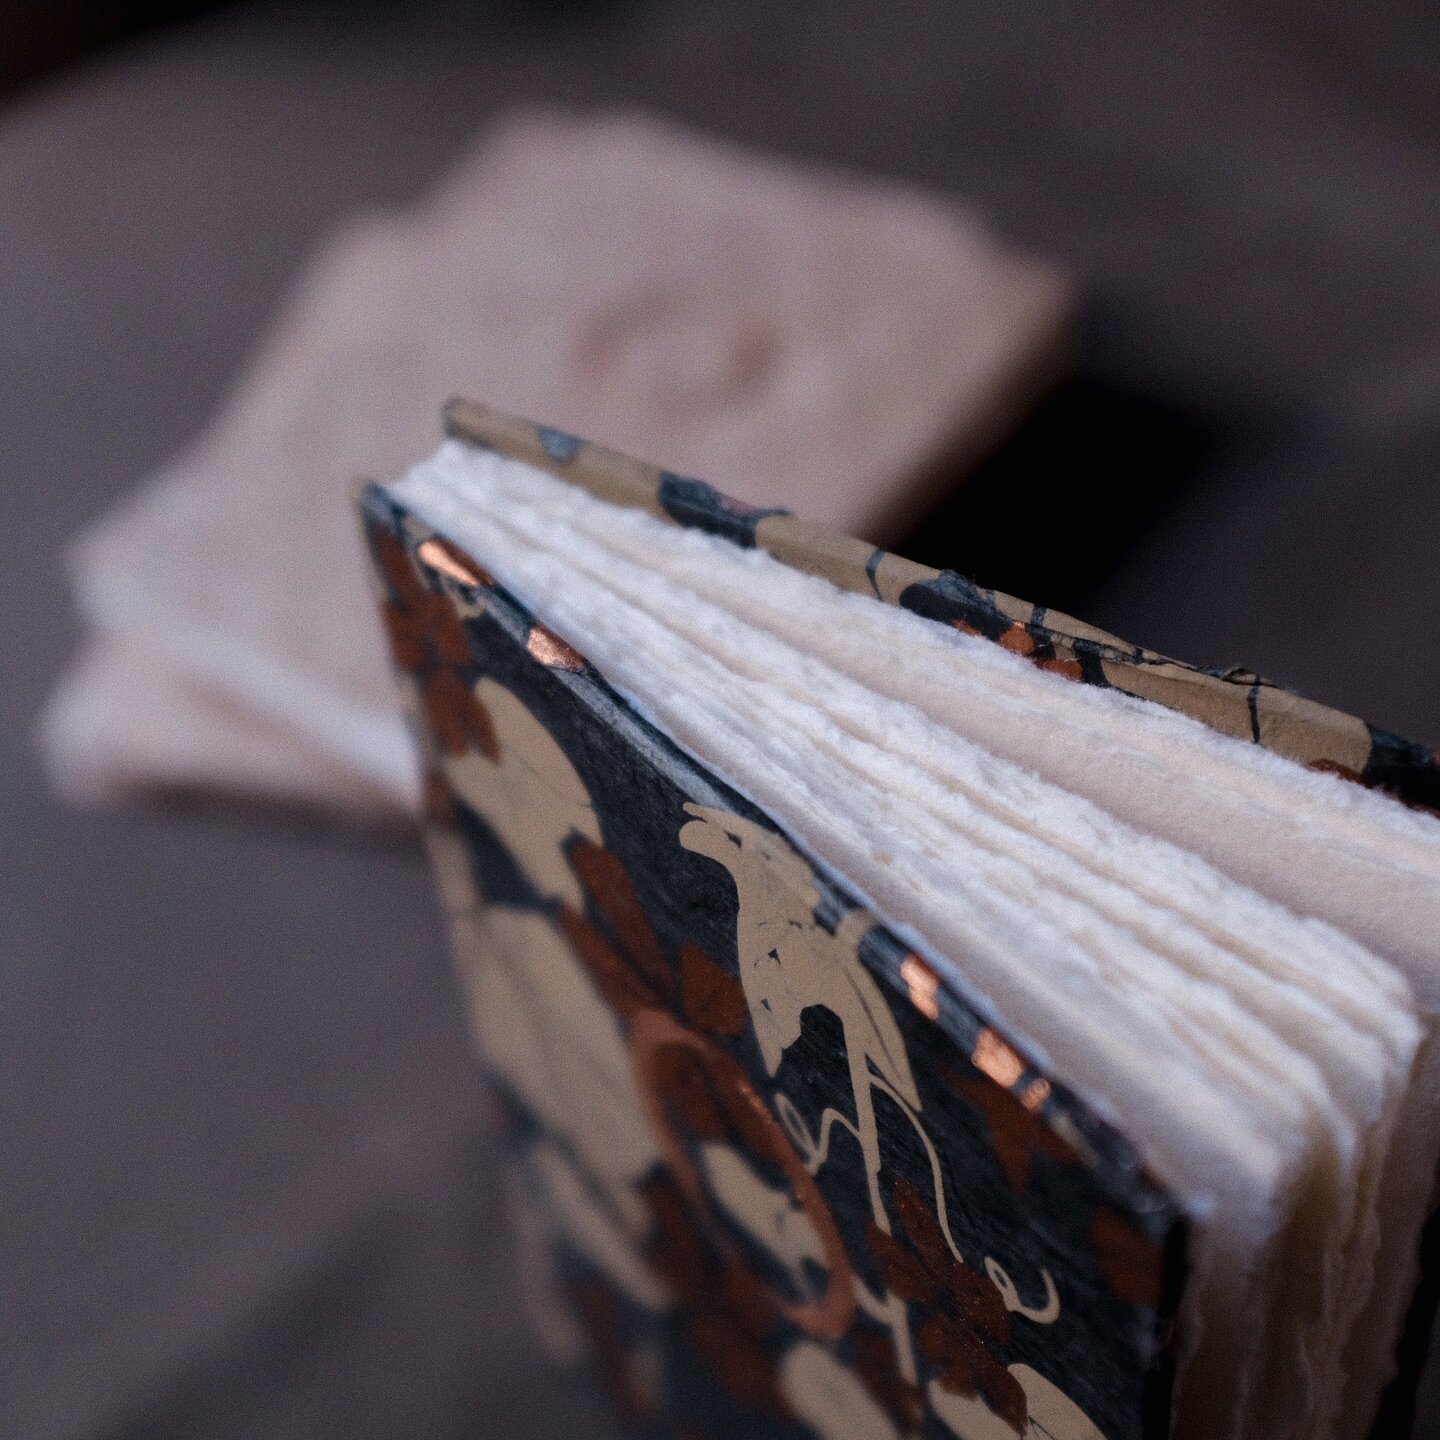 These Field Journals are made of 60 pages of handmade cotton paper with deckled edges, covered in Lokta paper, and bound with cotton thread

For drawing, writing, and light watercolours 

#handmadejournals 
#cottonpaper 
#loktapaper